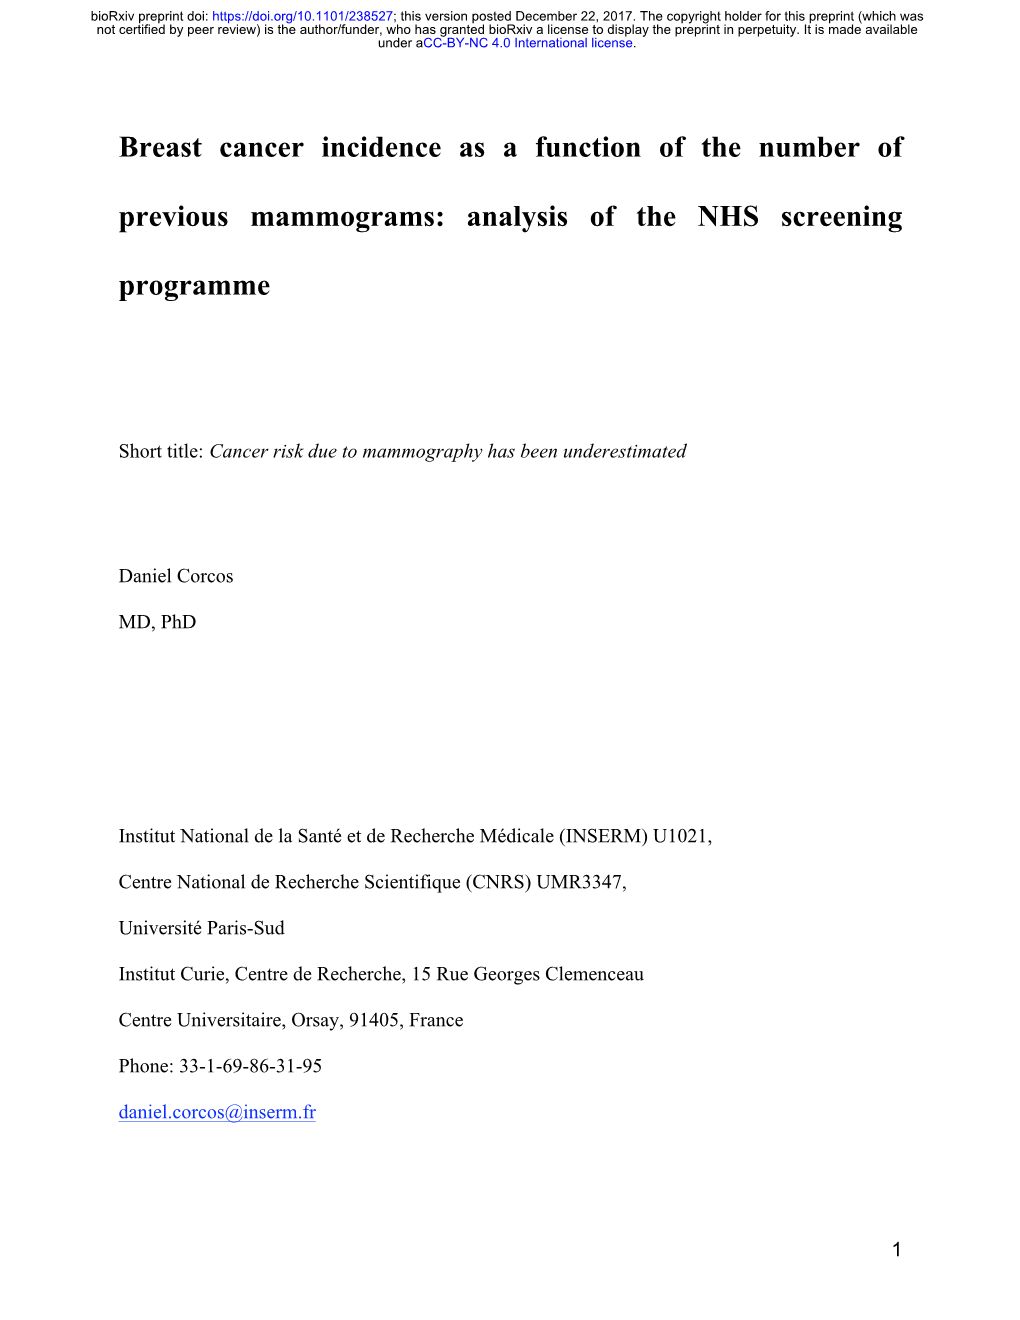 Breast Cancer Incidence As a Function of the Number of Previous Mammograms: Analysis of the NHS Screening Programme